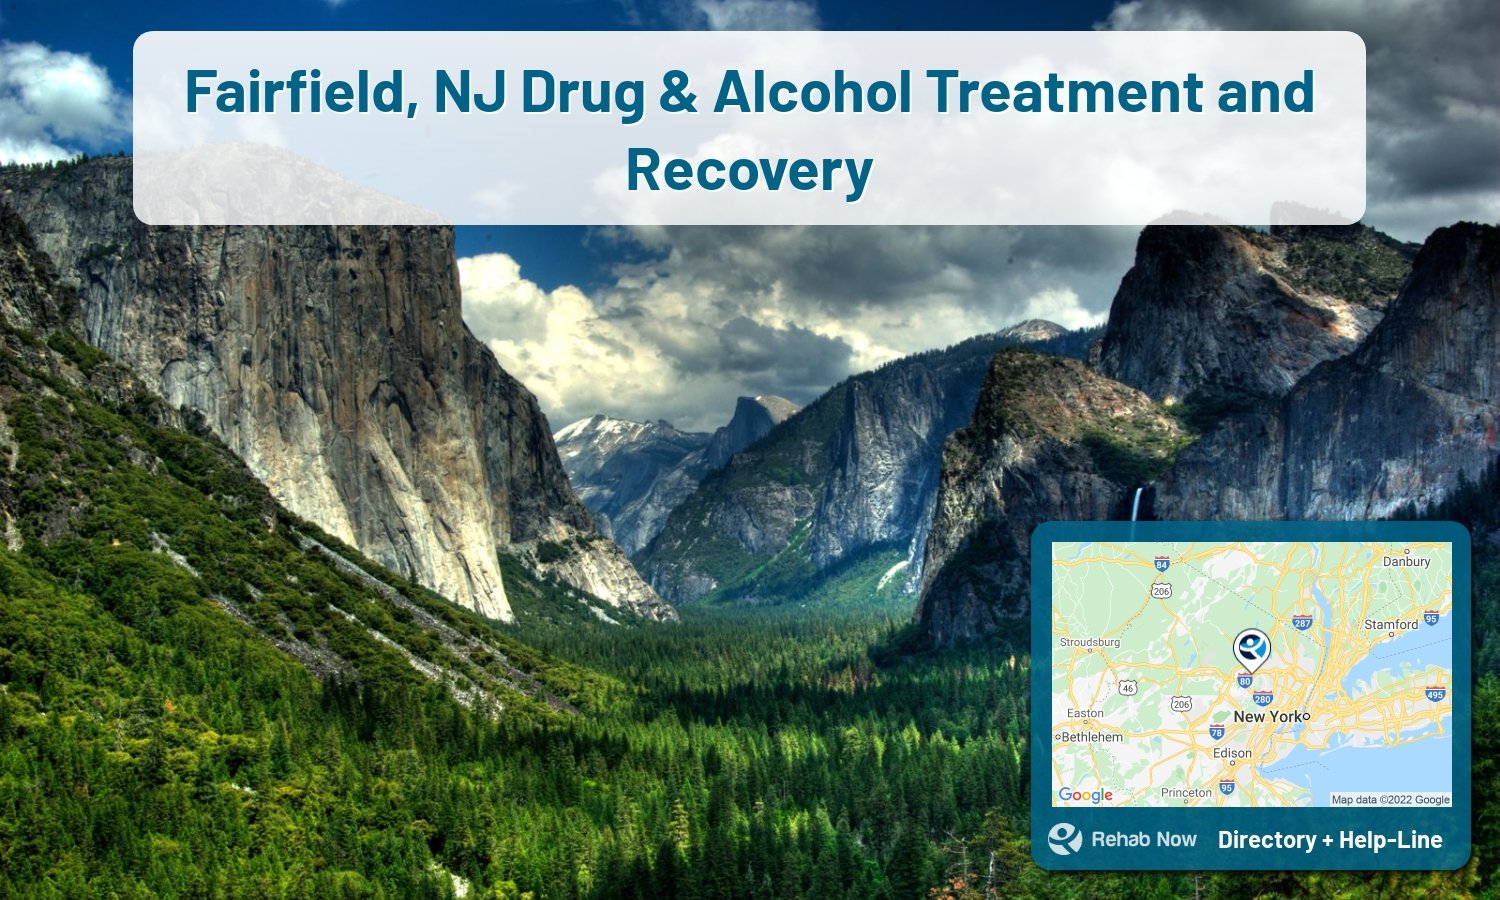 Fairfield, NJ Treatment Centers. Find drug rehab in Fairfield, New Jersey, or detox and treatment programs. Get the right help now!